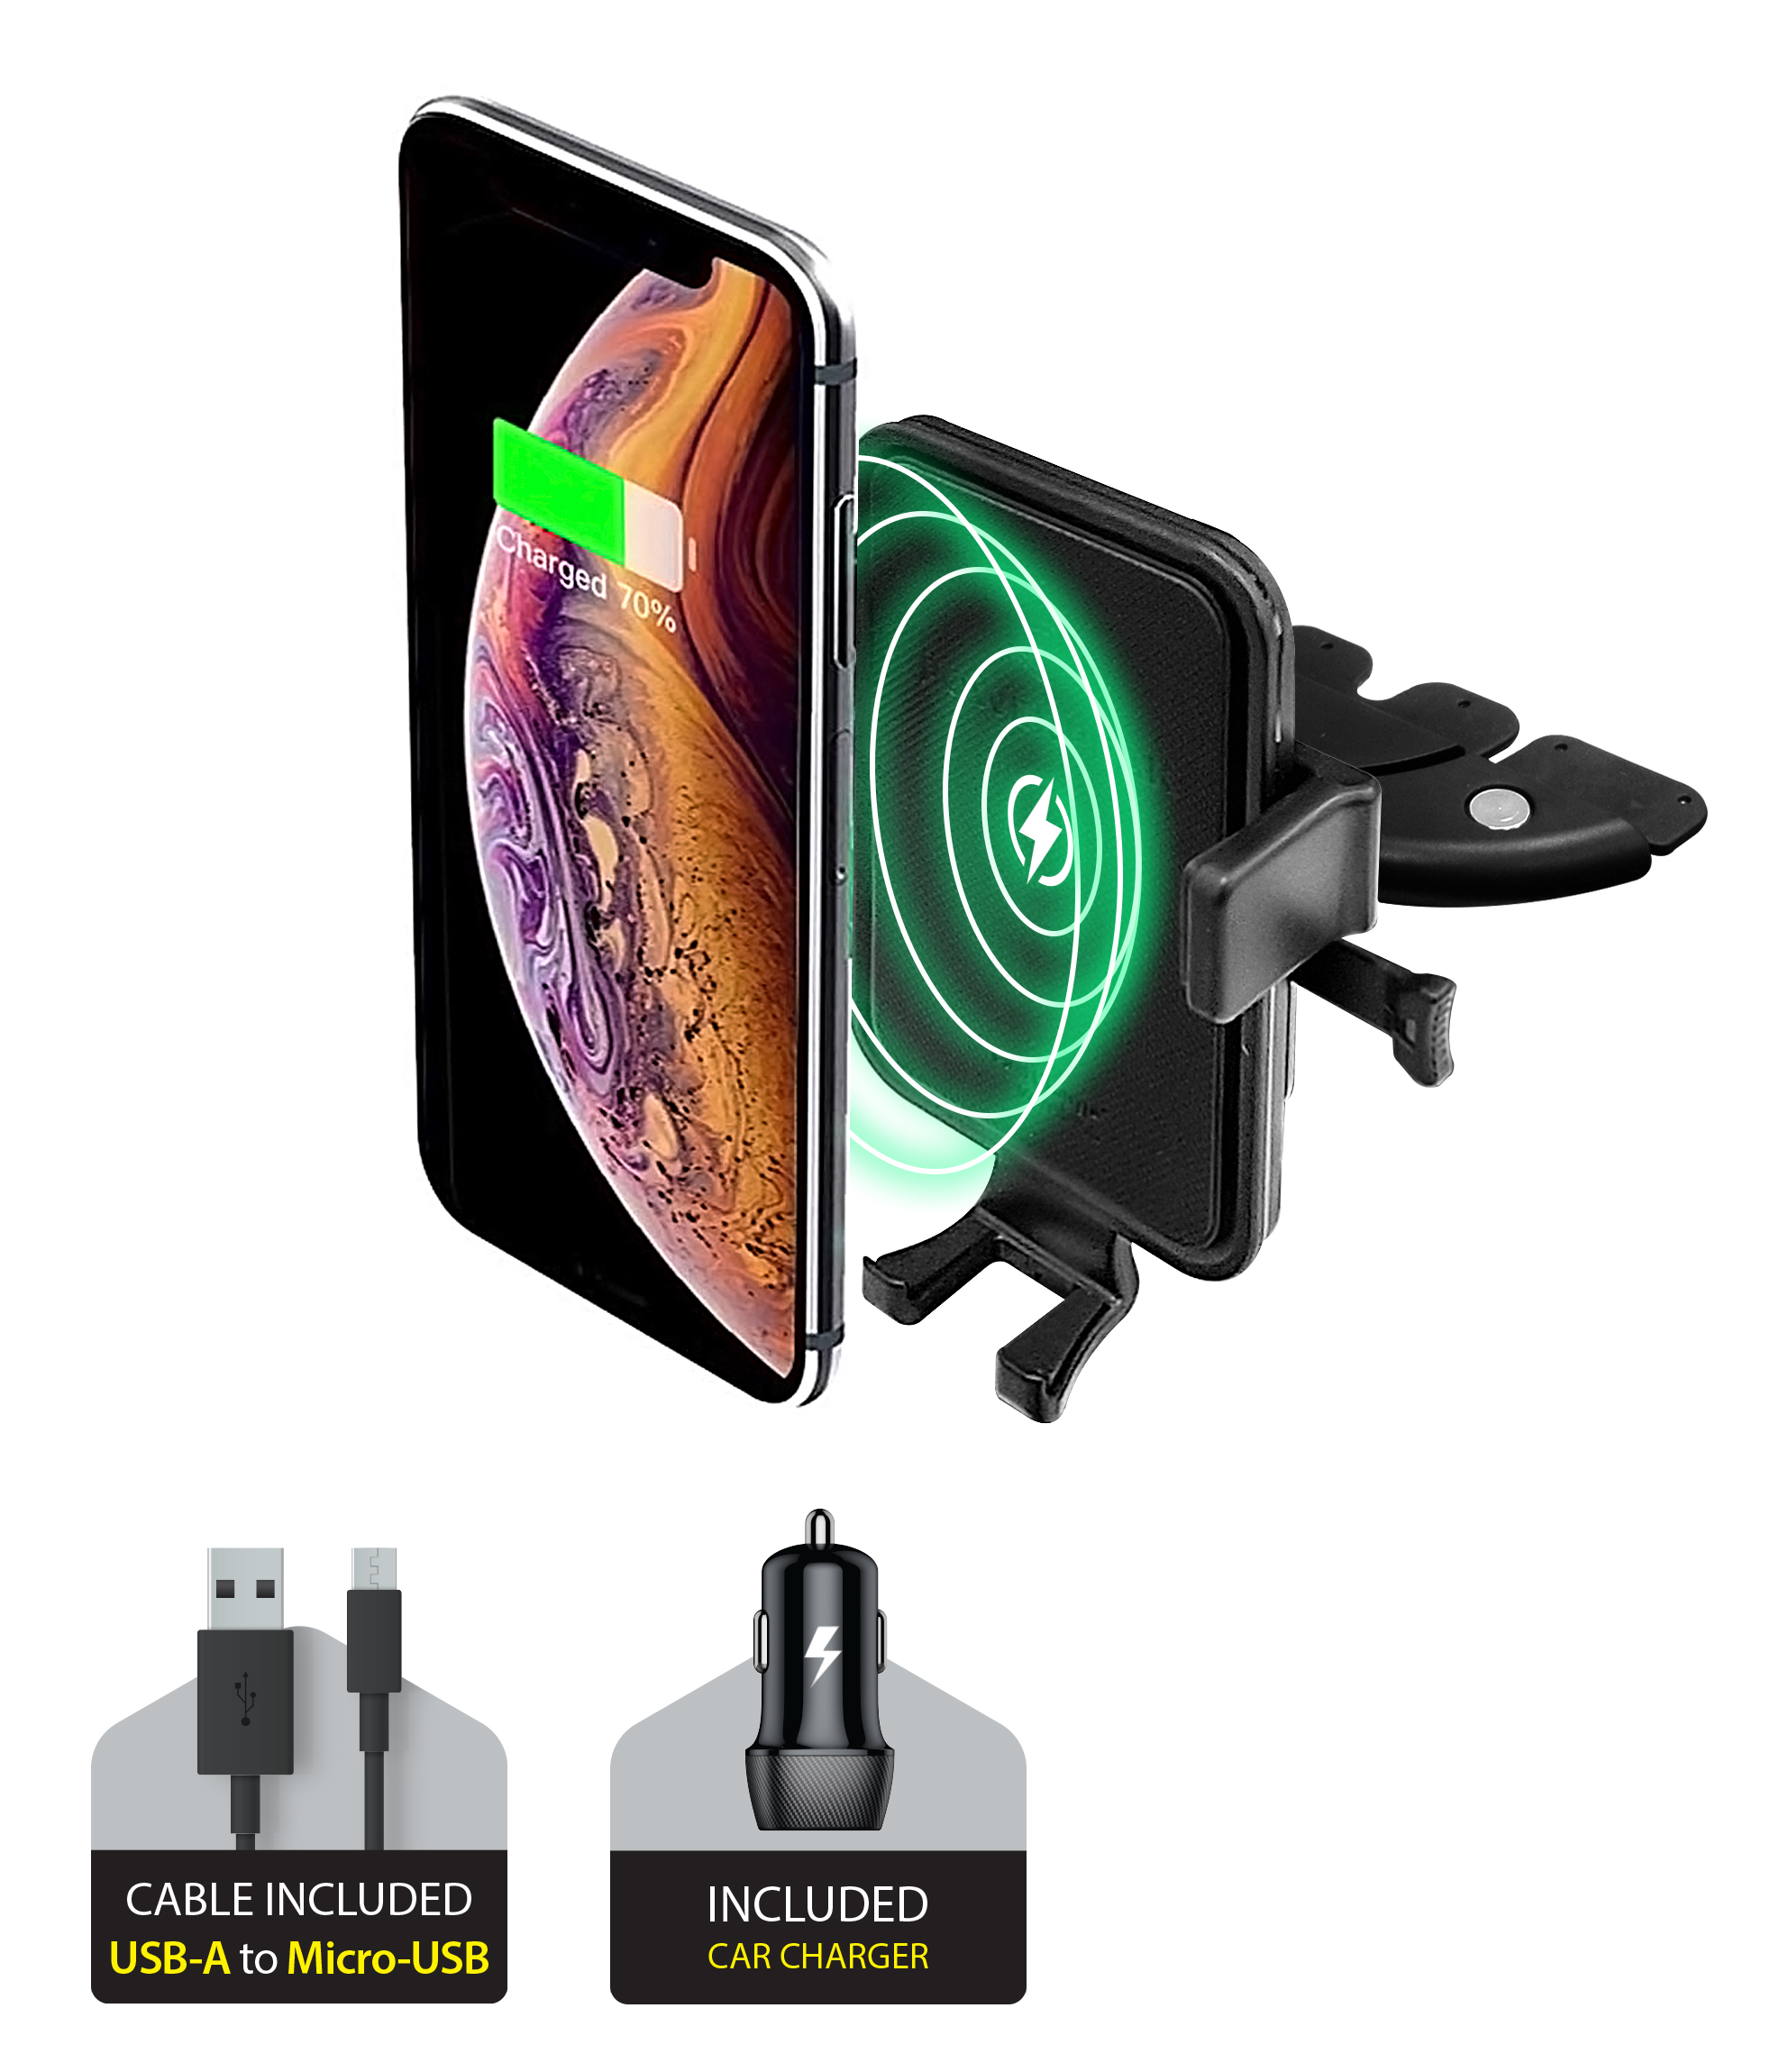 Black Wireless charging CD Slot Mount for Mobile Devices. Included car charger and cable USB-A to Micro-USB